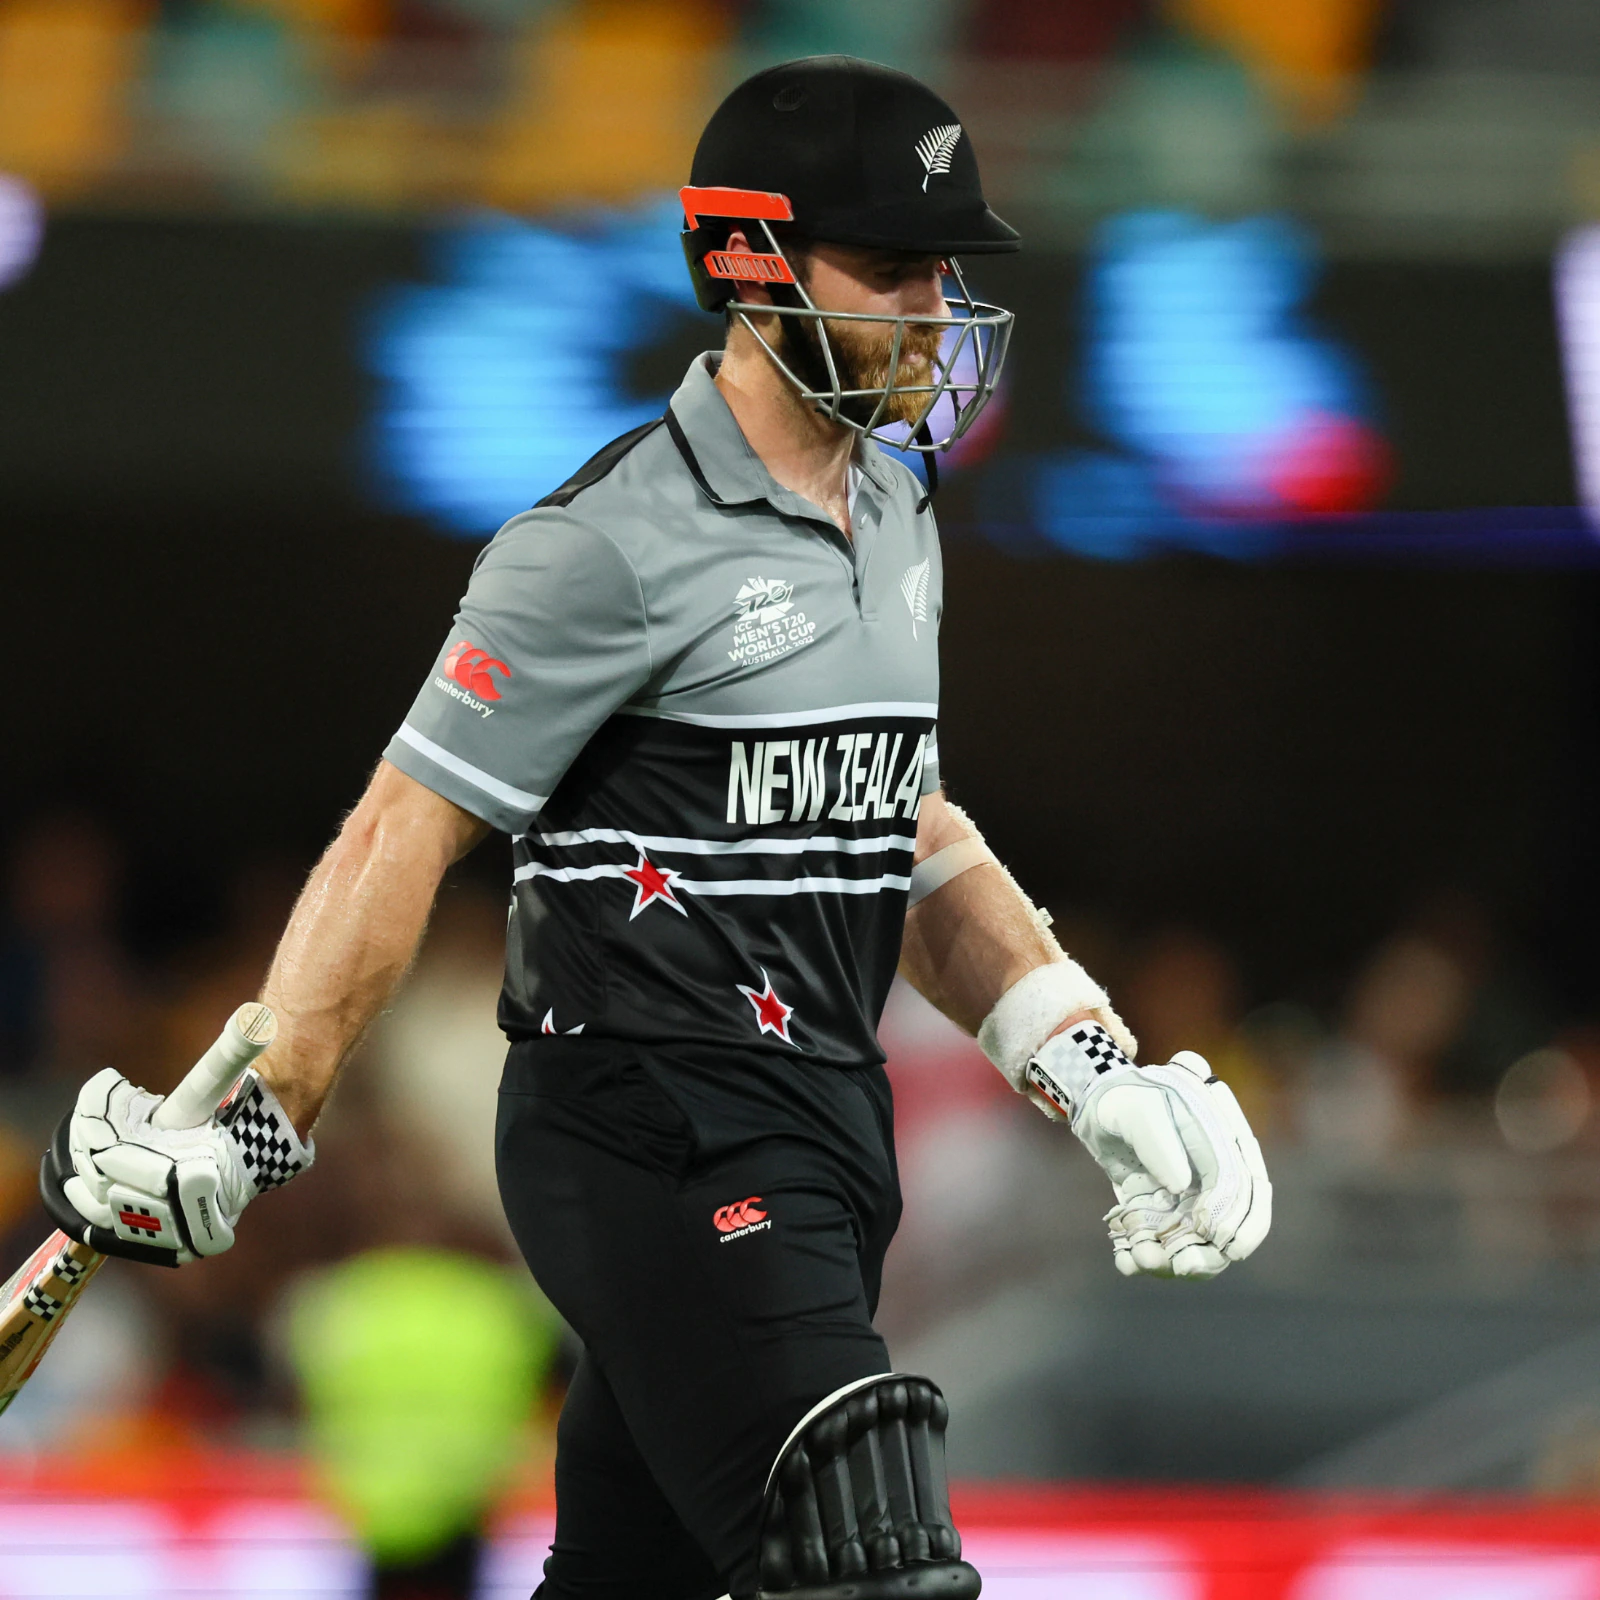 Kane Williamson has been named the skipper of the New Zealand squad for T20 World Cup, for the fourth time. He will be a great talent and experience add-on to the team as it will be his sixth T20 World Cup appearance. (Photo: AP)